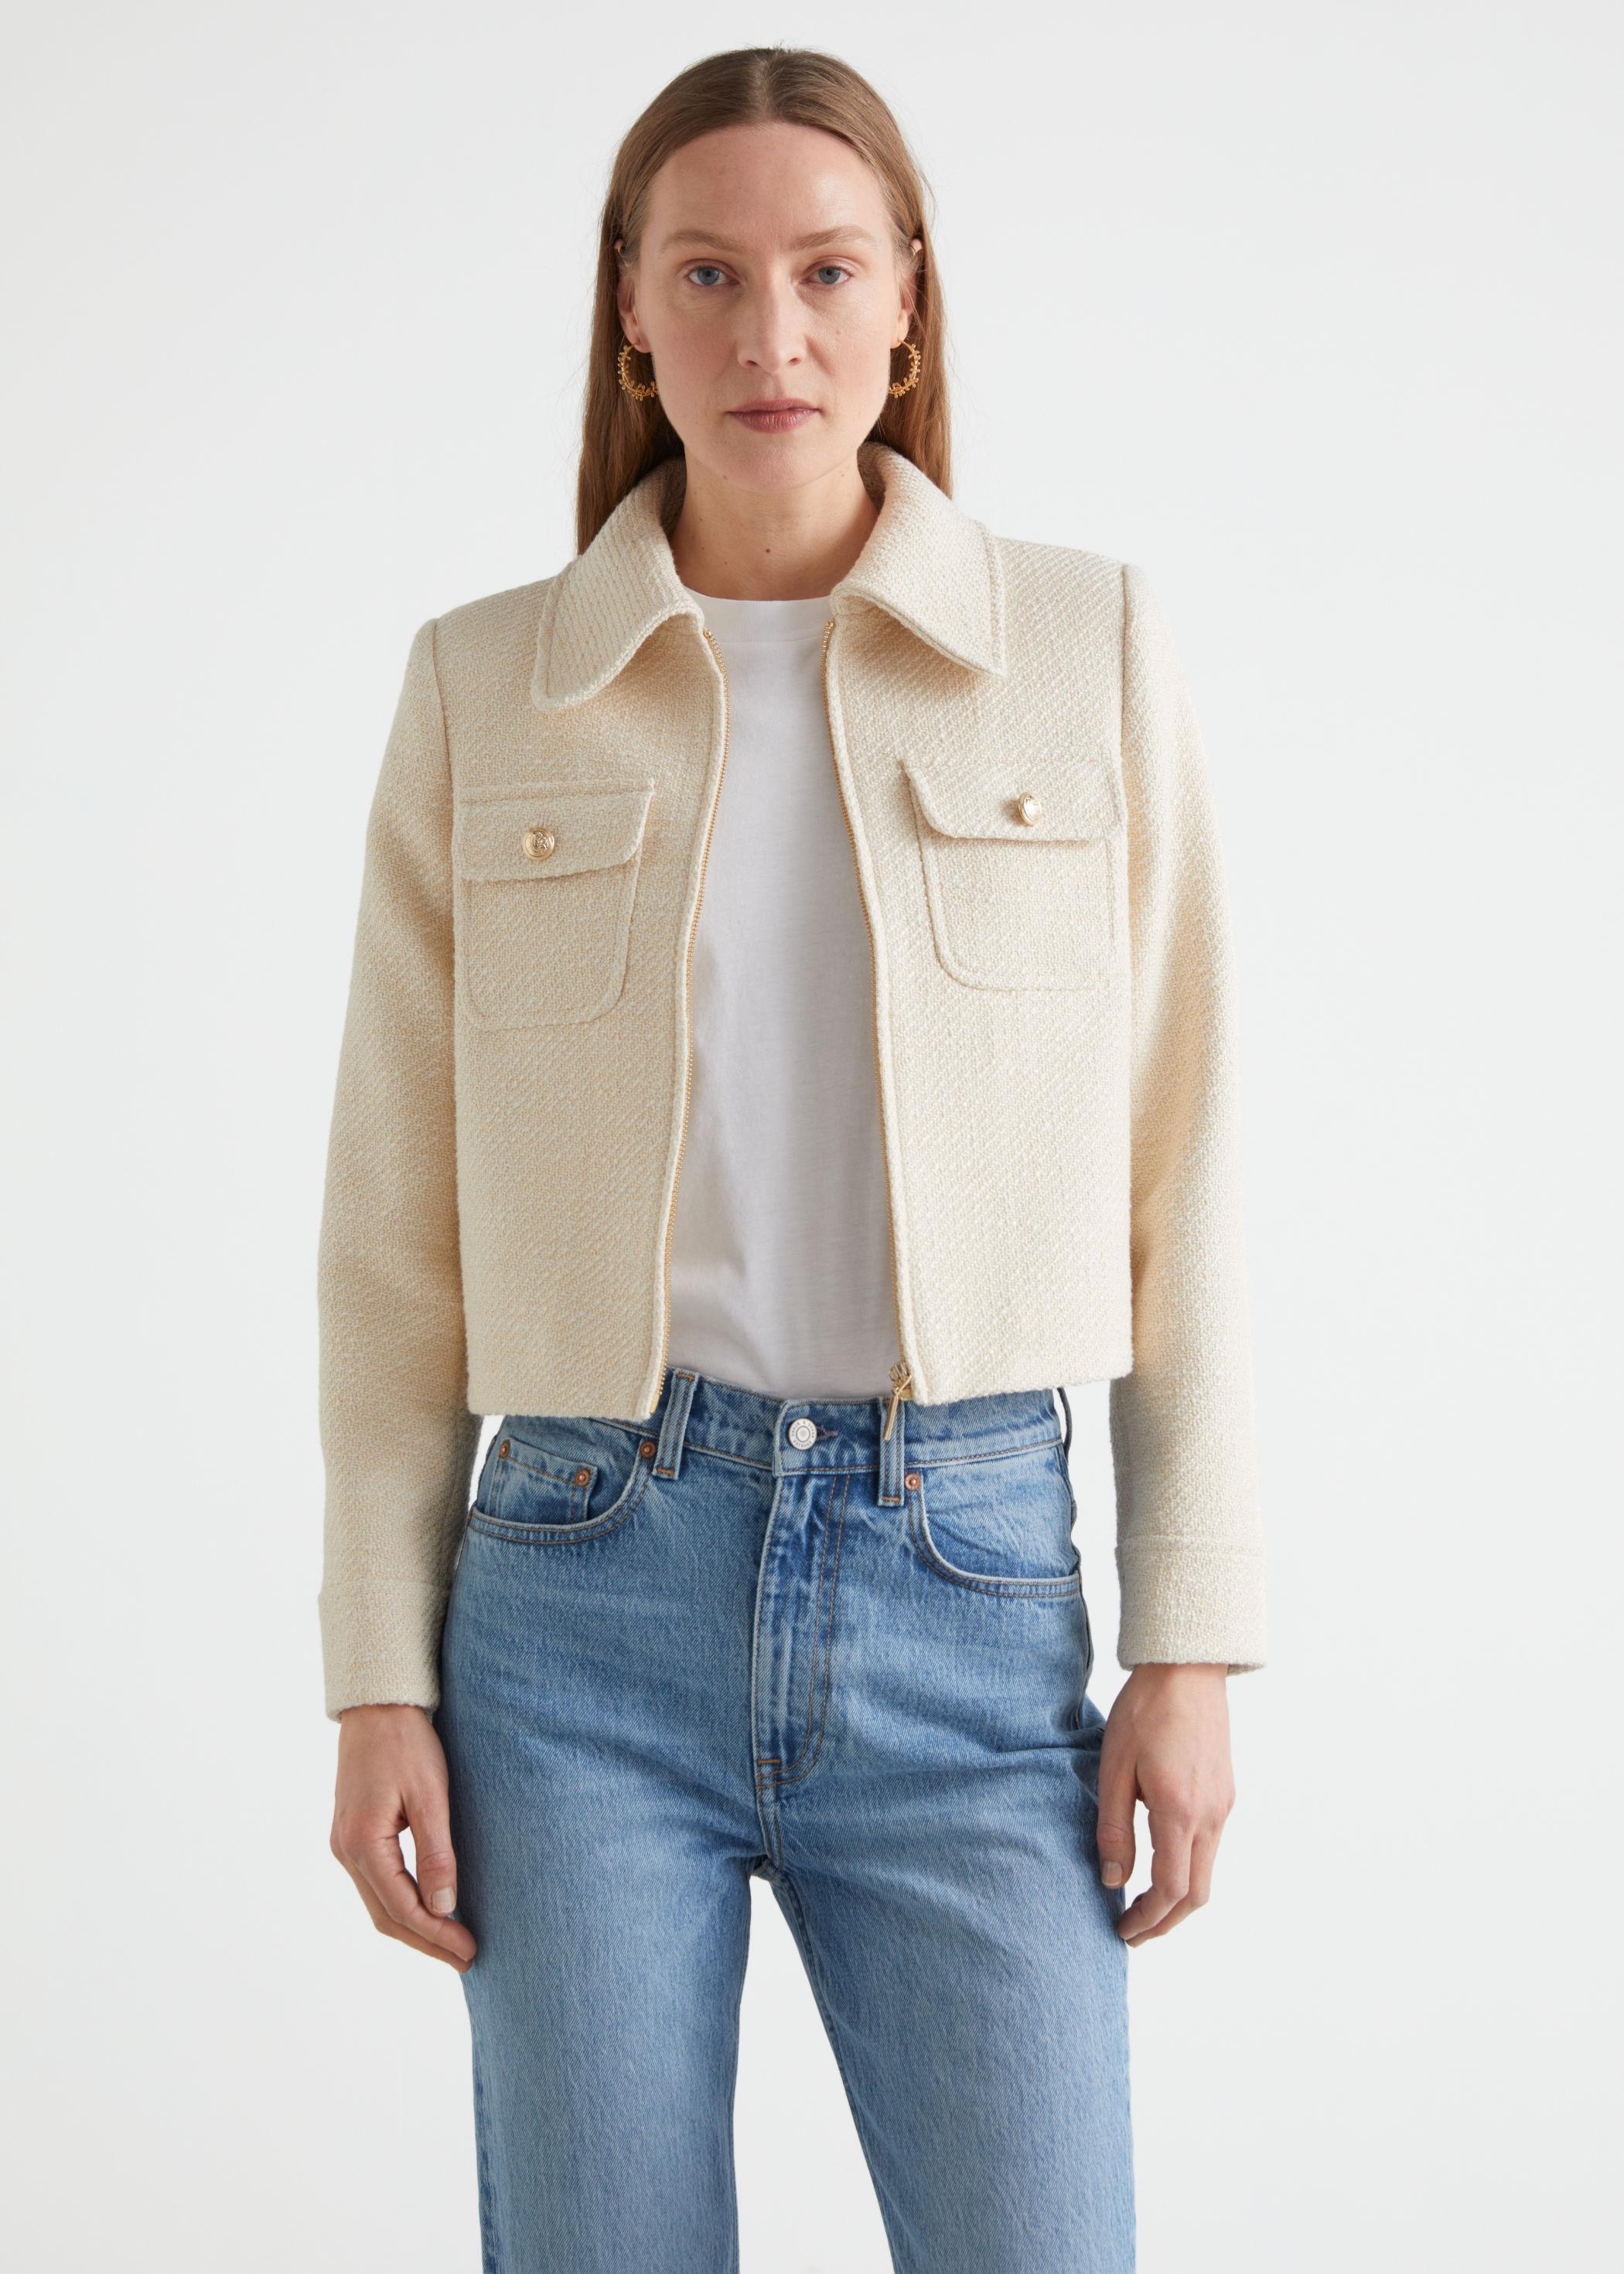 & Other Stories Cropped Tweed Jacket in White | Lyst